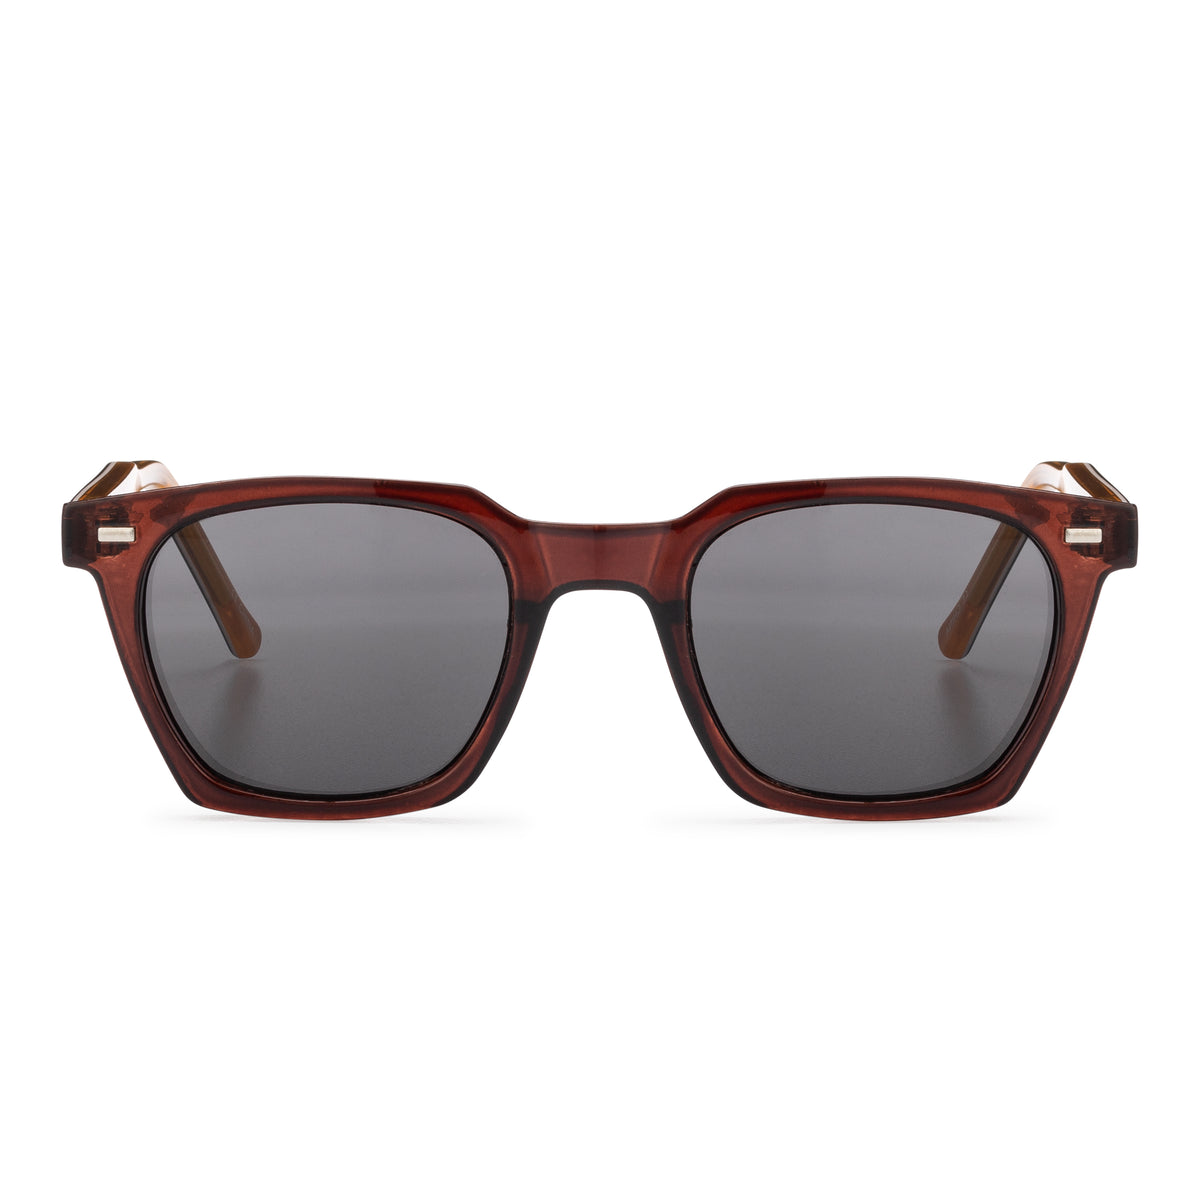 BC2 - Back From the Archives Acetate Classic Sunglasses - Brown/Black